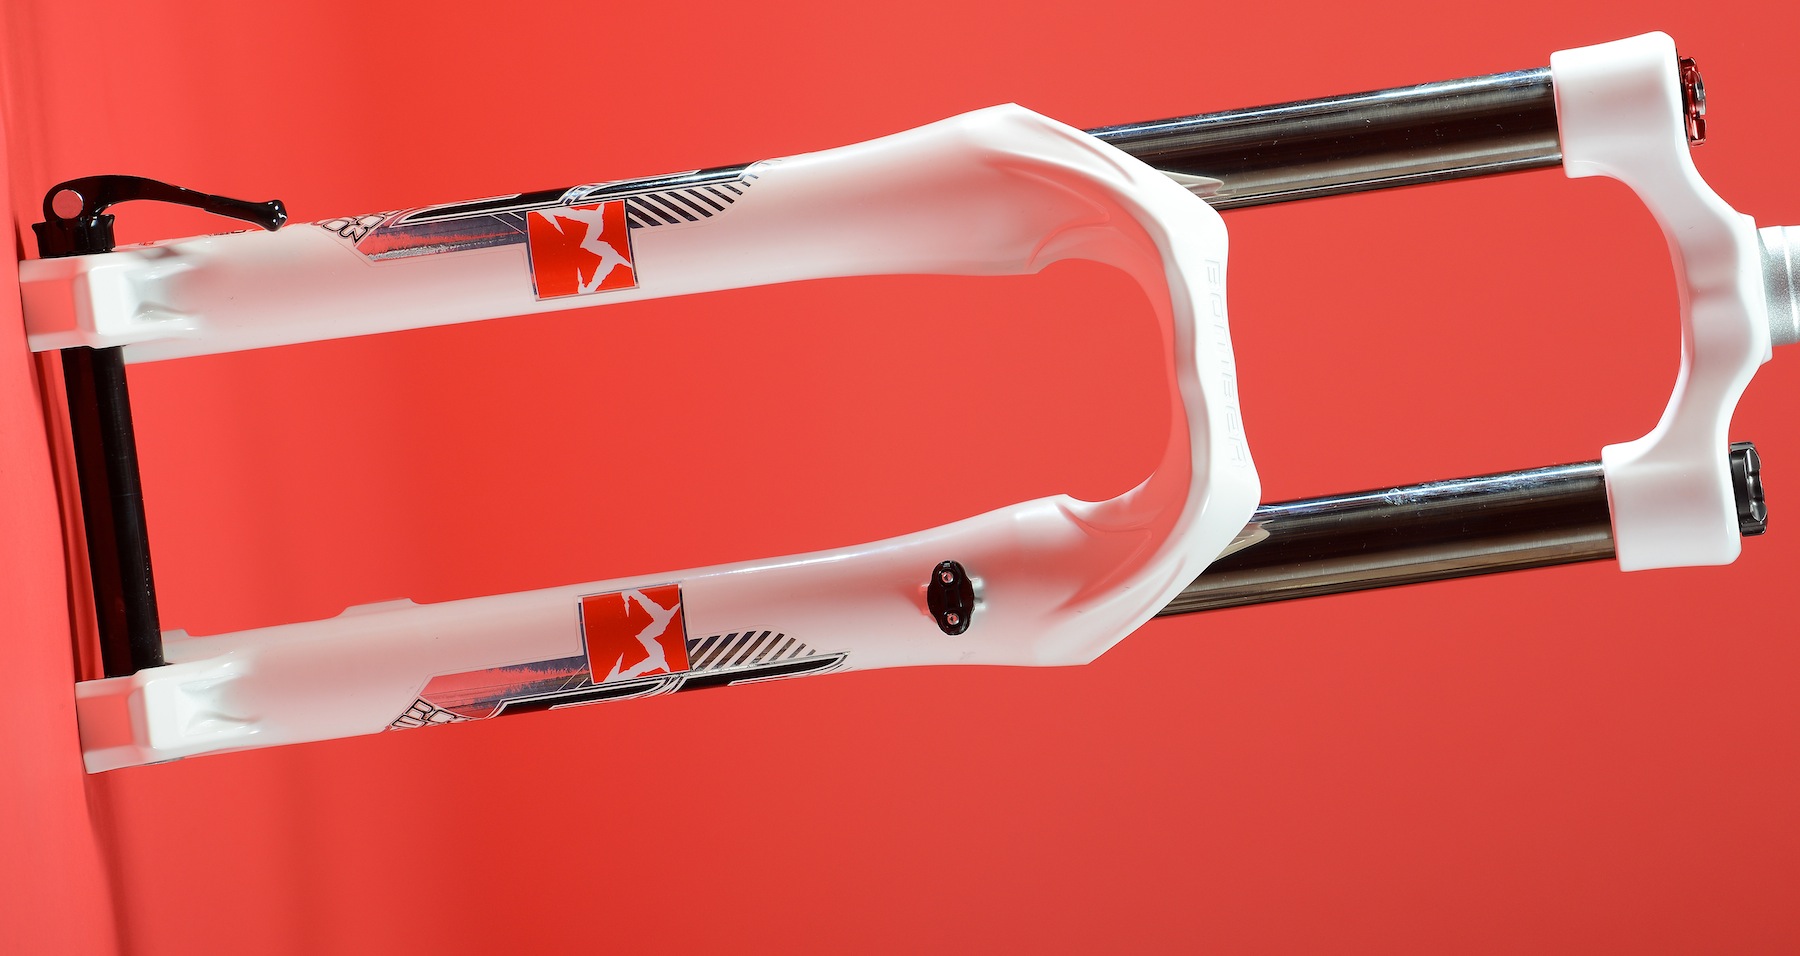 marzocchi super monster 300mm travel fork